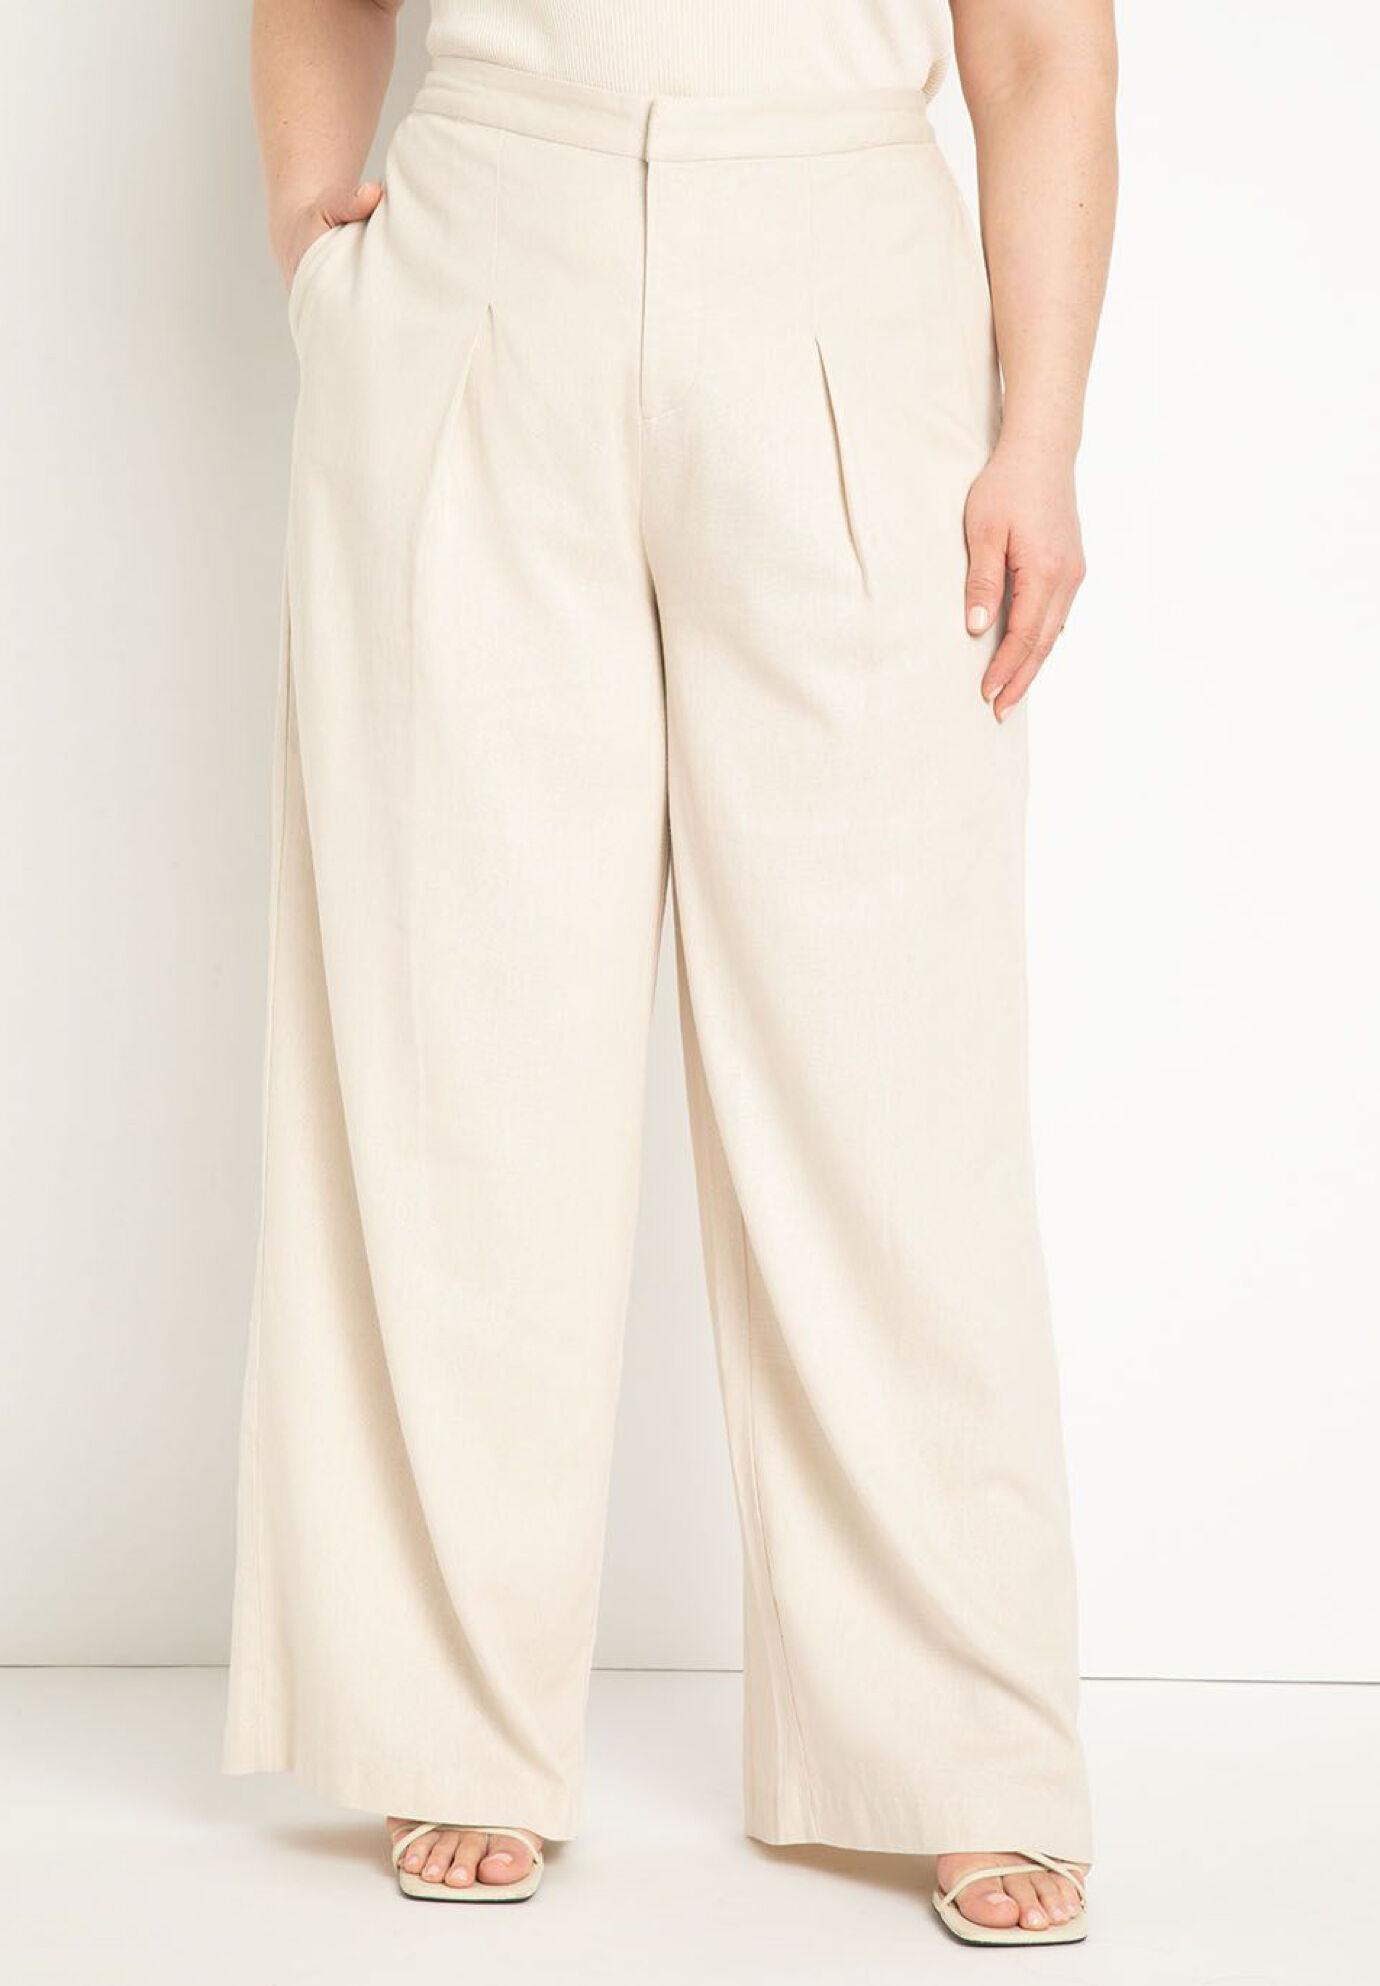 Eloquii Cropped Wide Leg Linen Pants, Musings of a Curvy Lady